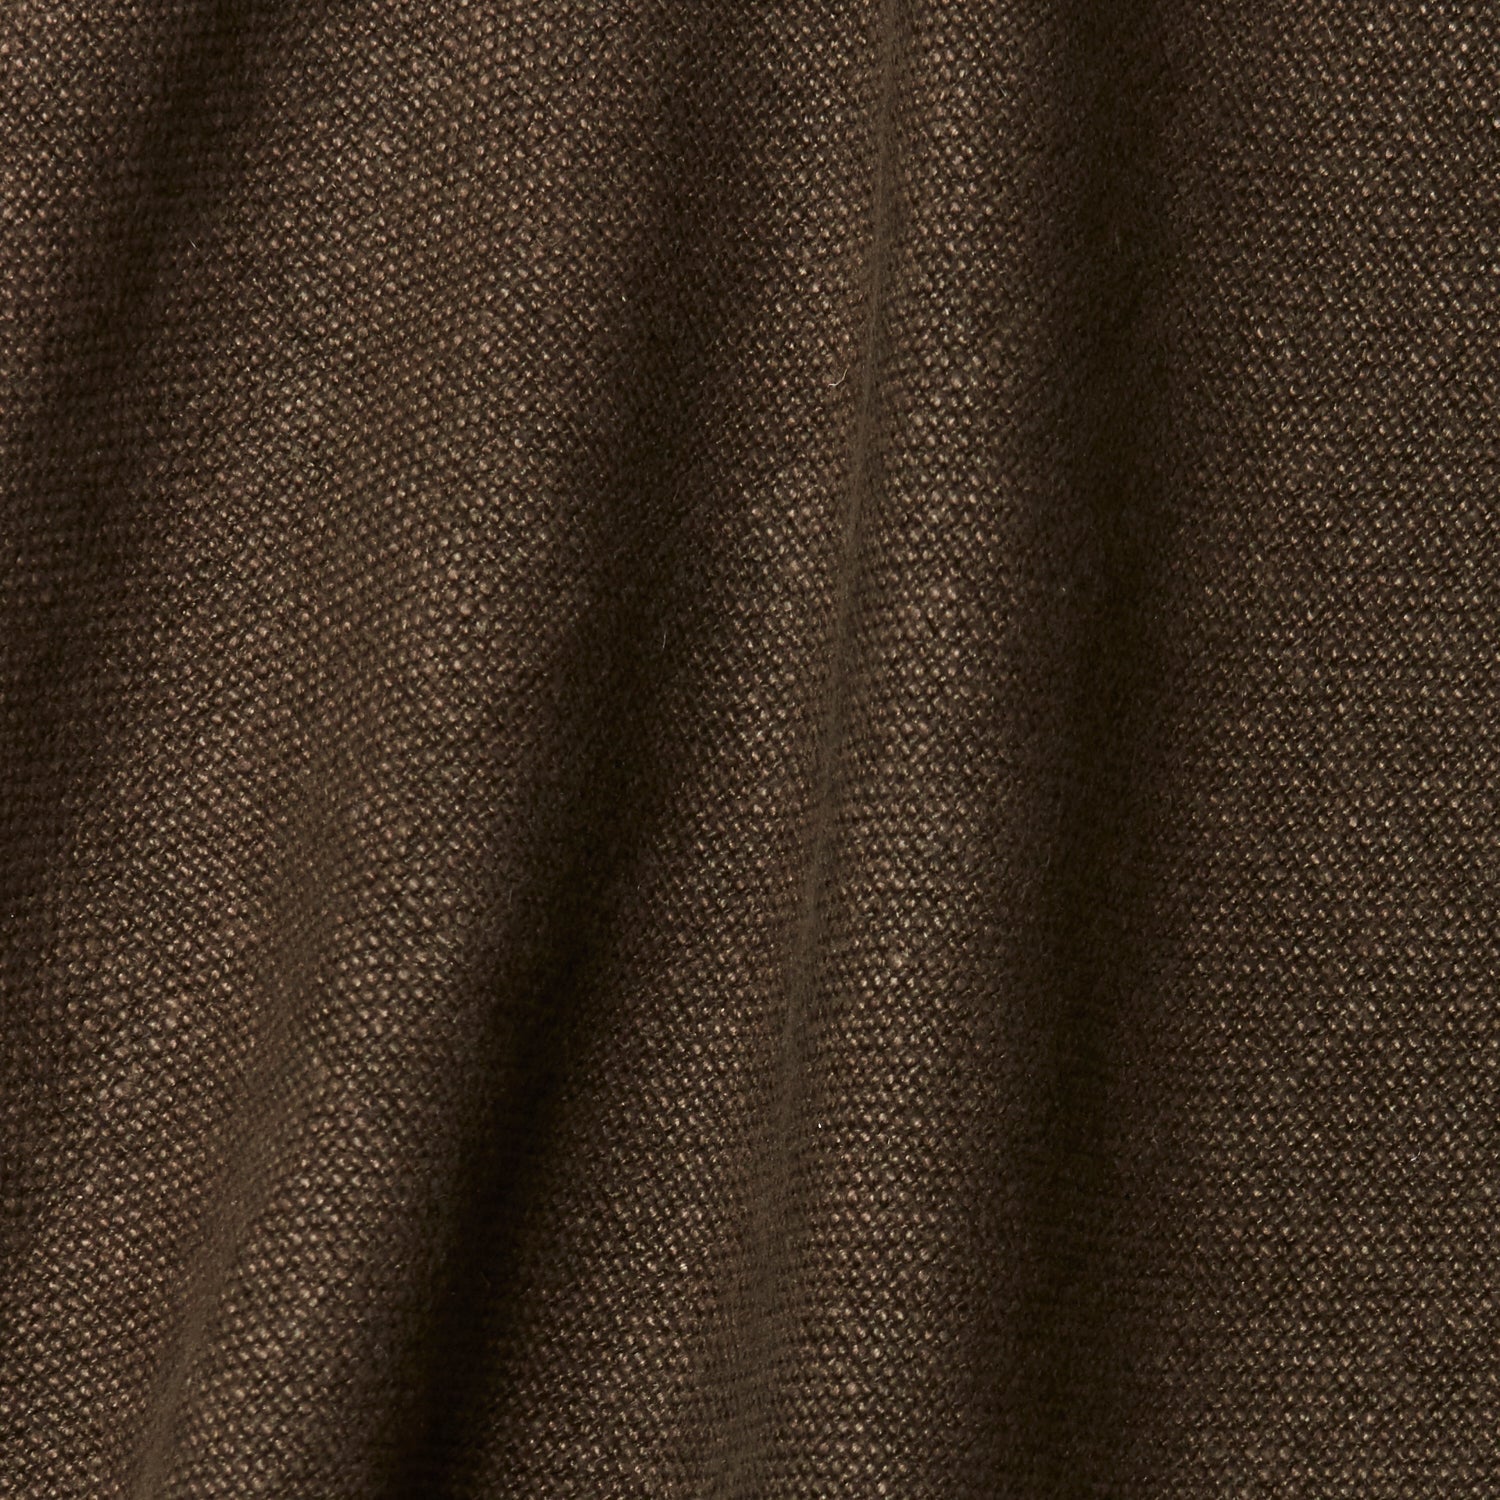 A draped swatch of old-world linen fabric in a solid dark brown color.